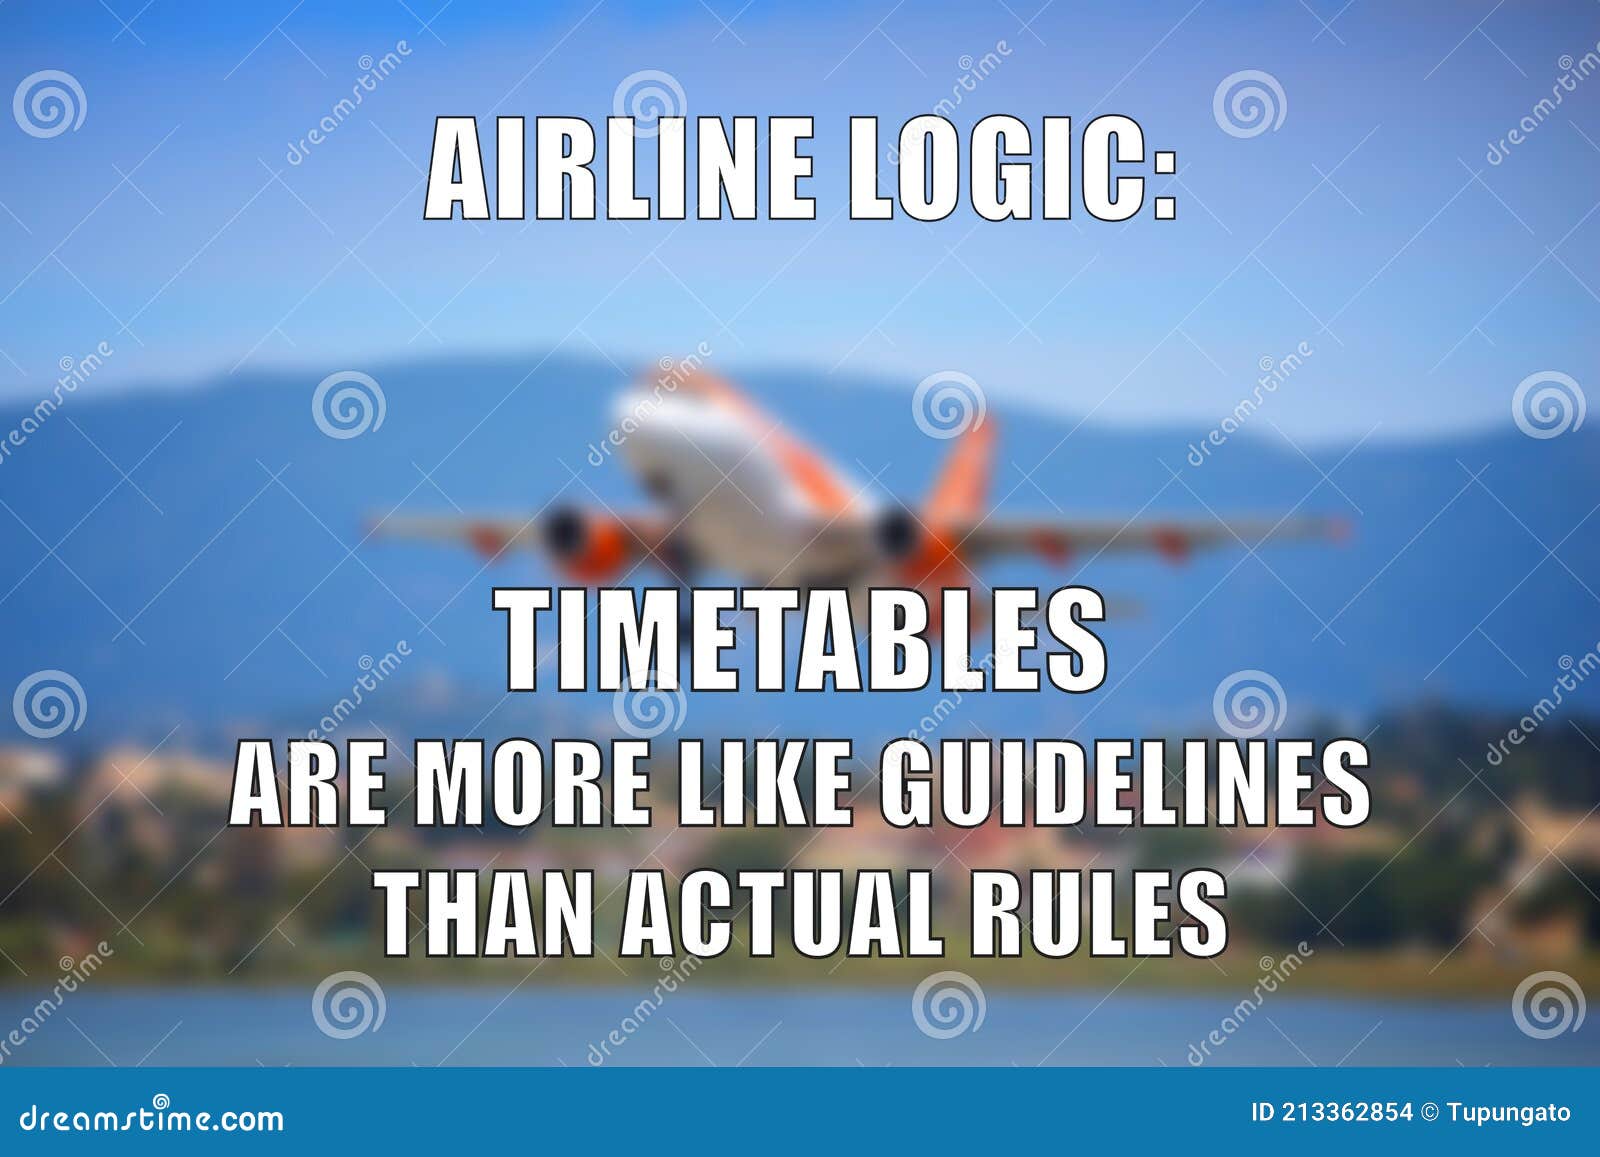 Airline memes stock photo. Image of delay, memes, delayed - 213362854